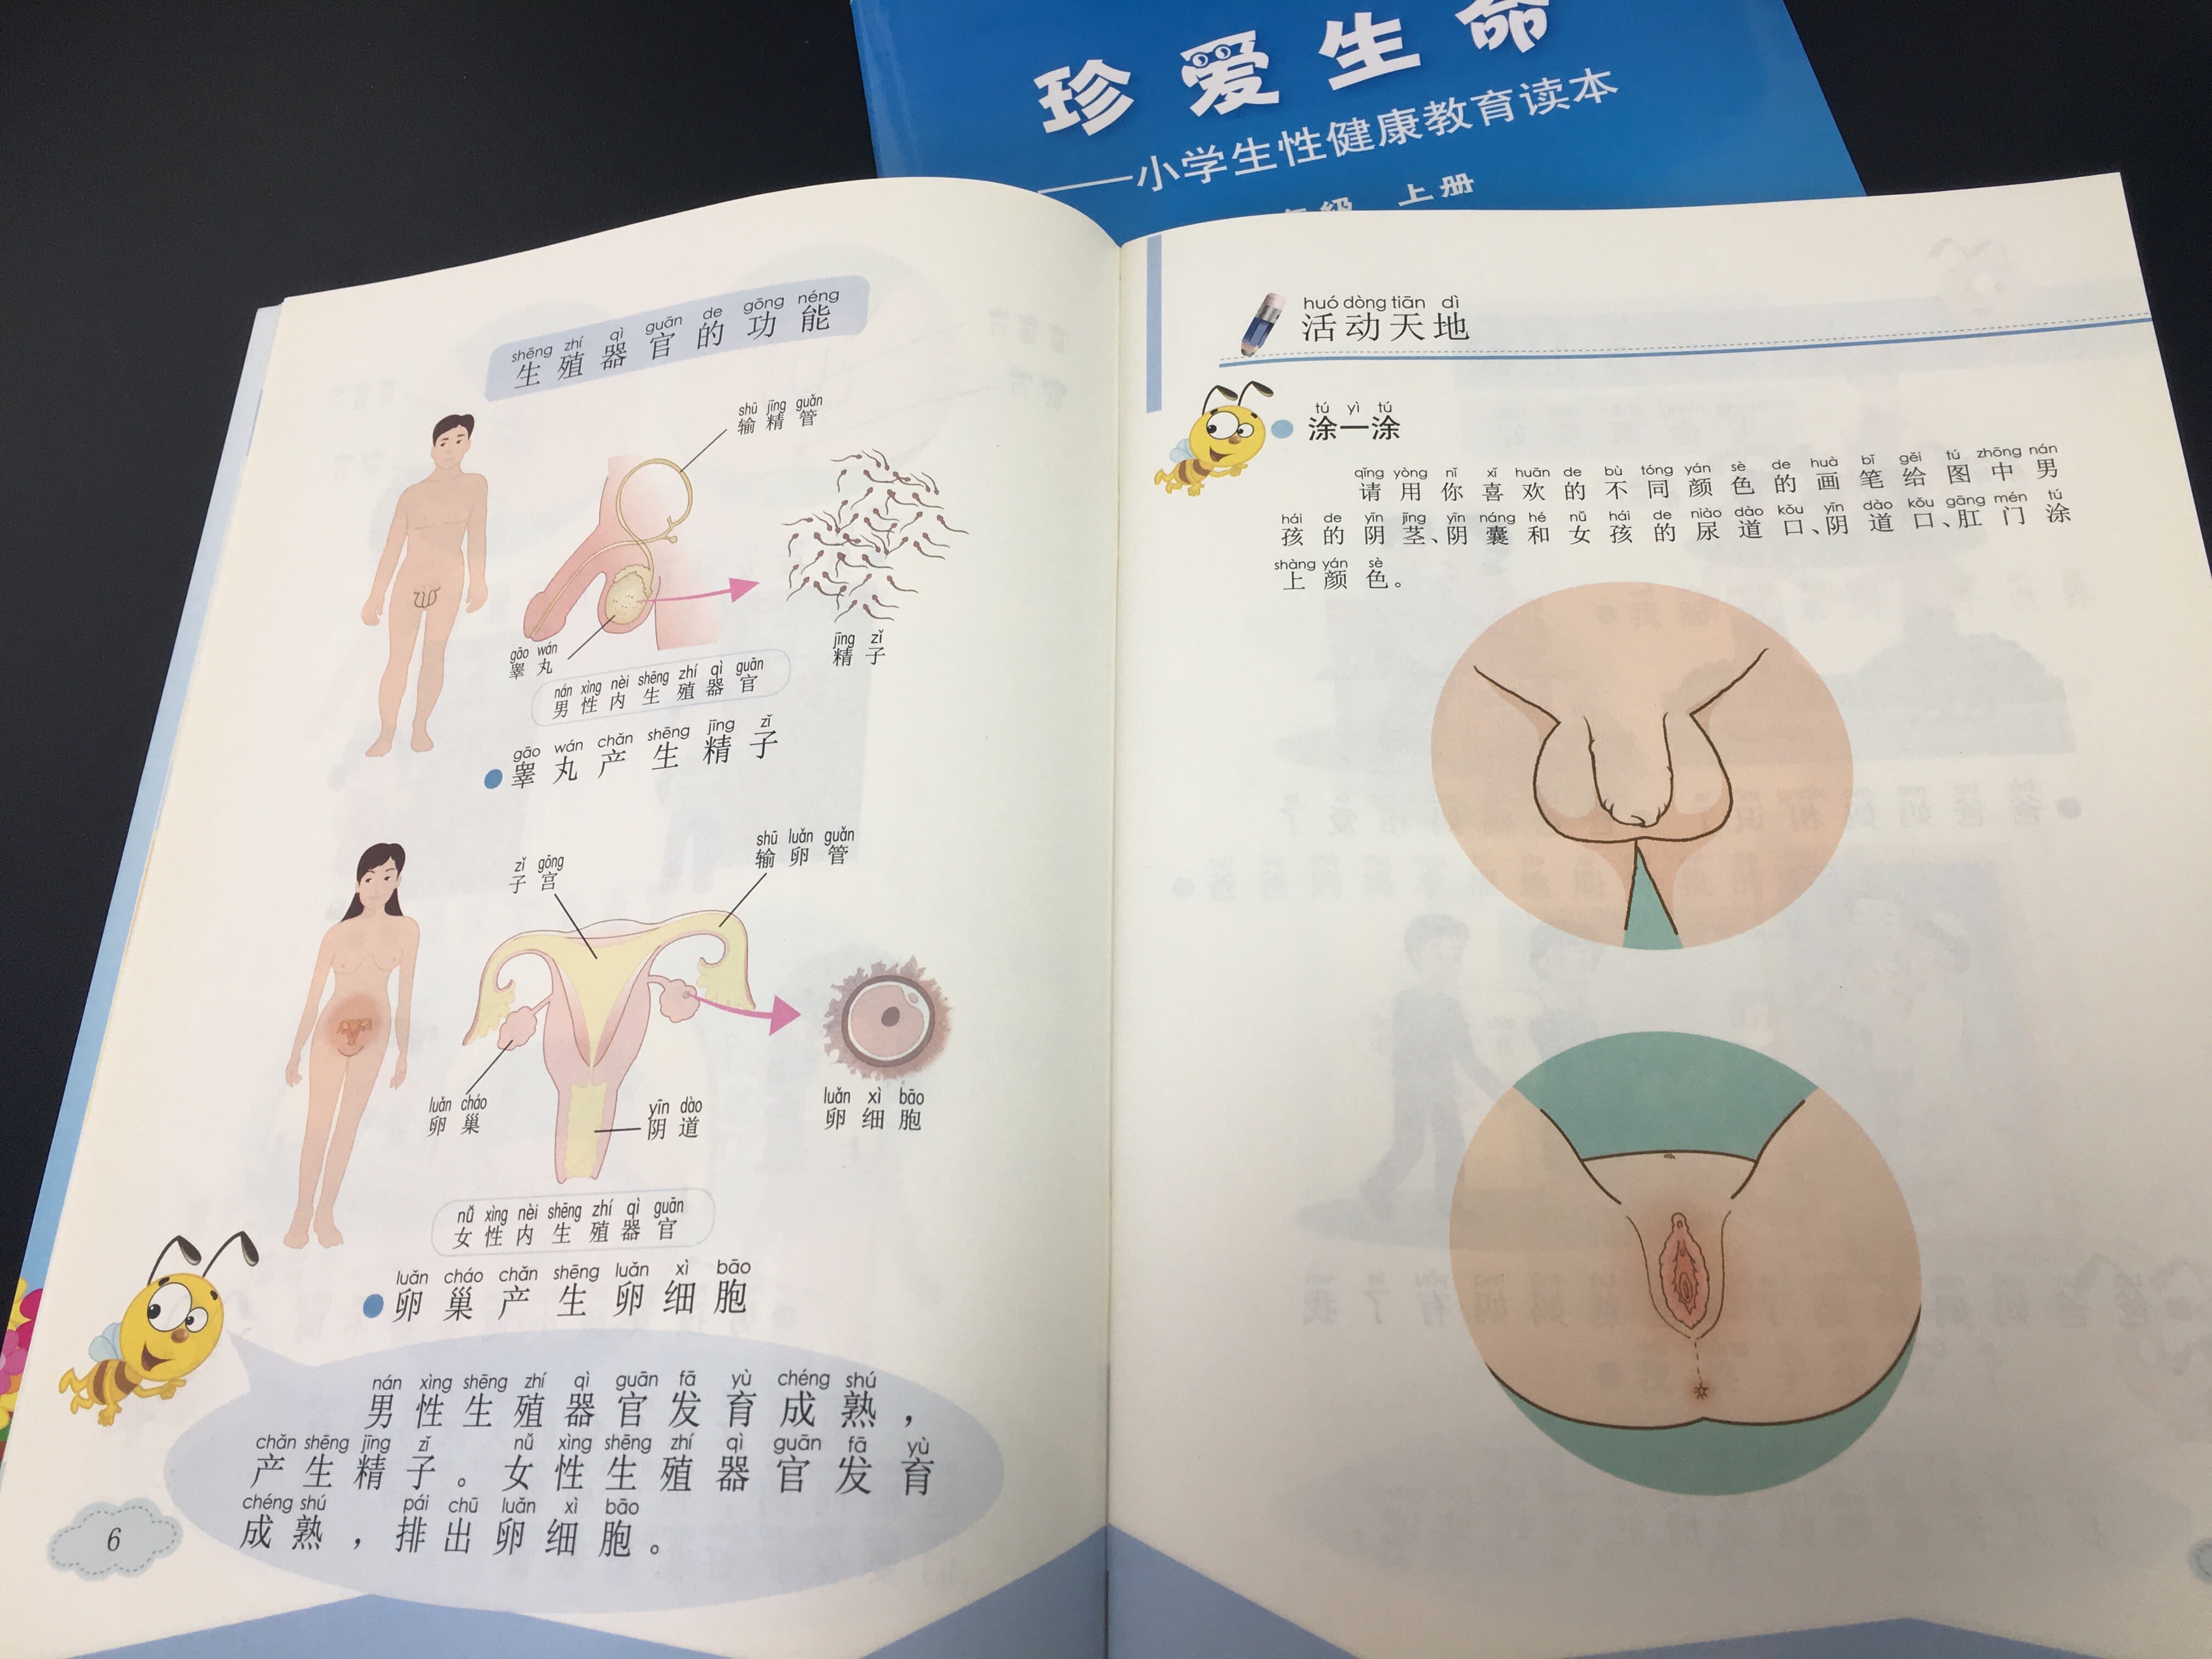 Www Chineshe Schel Sex - Shock and praise for groundbreaking sex-ed textbook in China | CNN